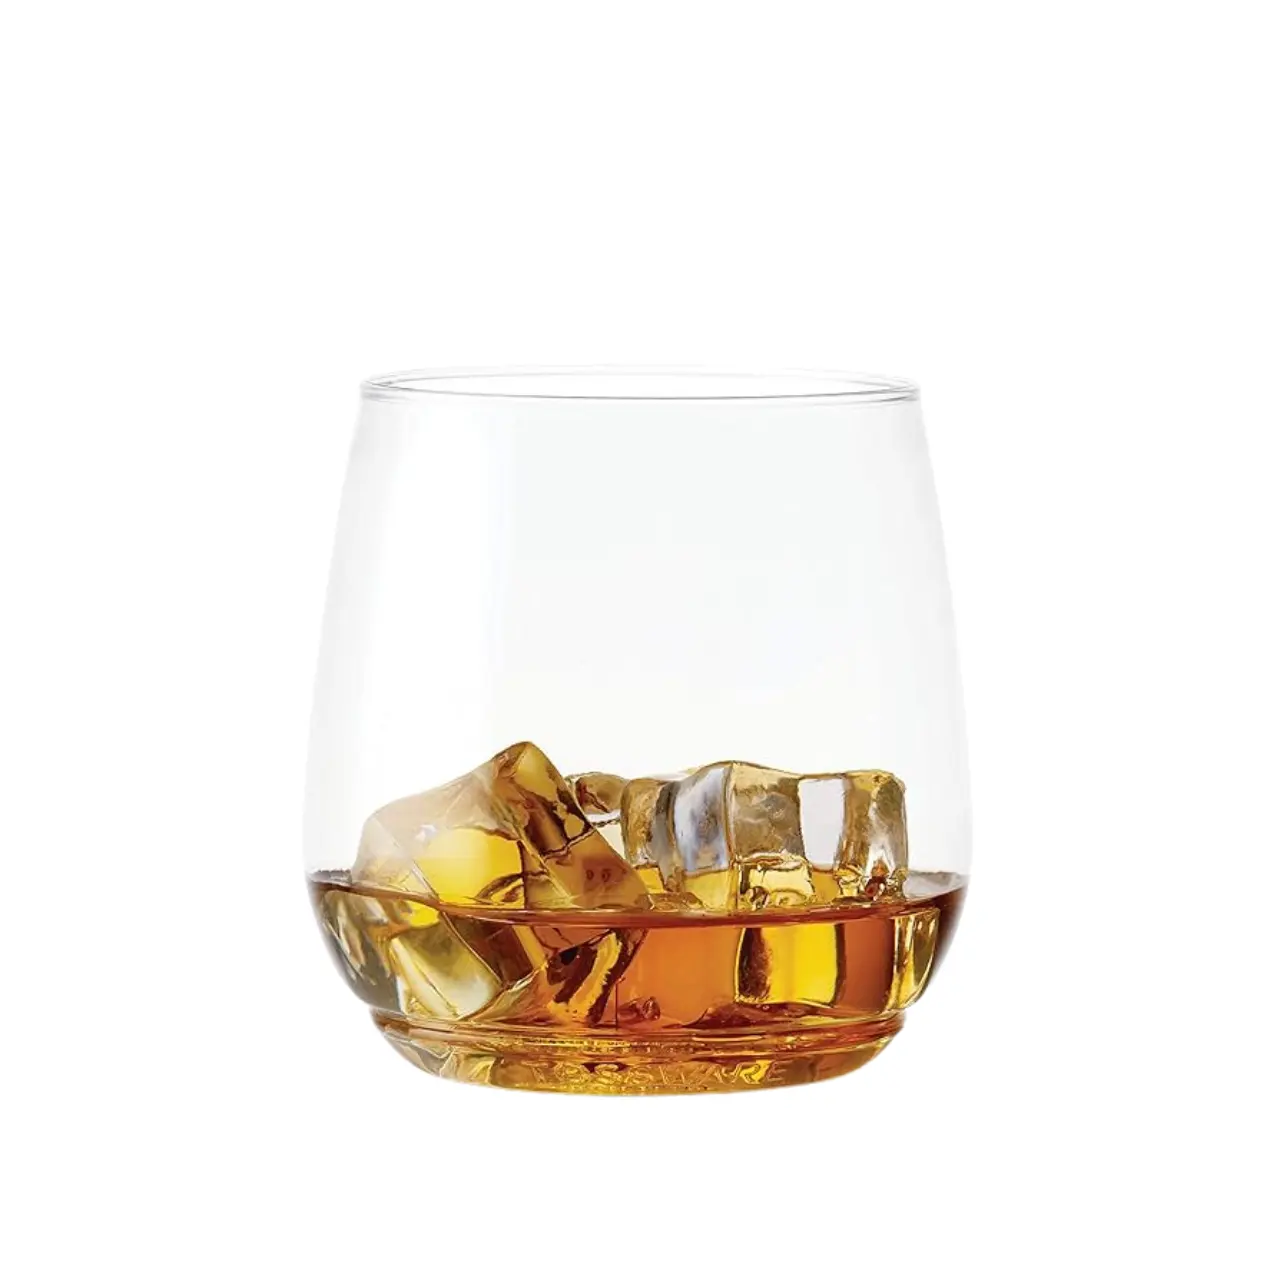 Disposable Plastic Stemless Wine Glass Shatterproof Fully Stackable Home Goods Wine Glasses